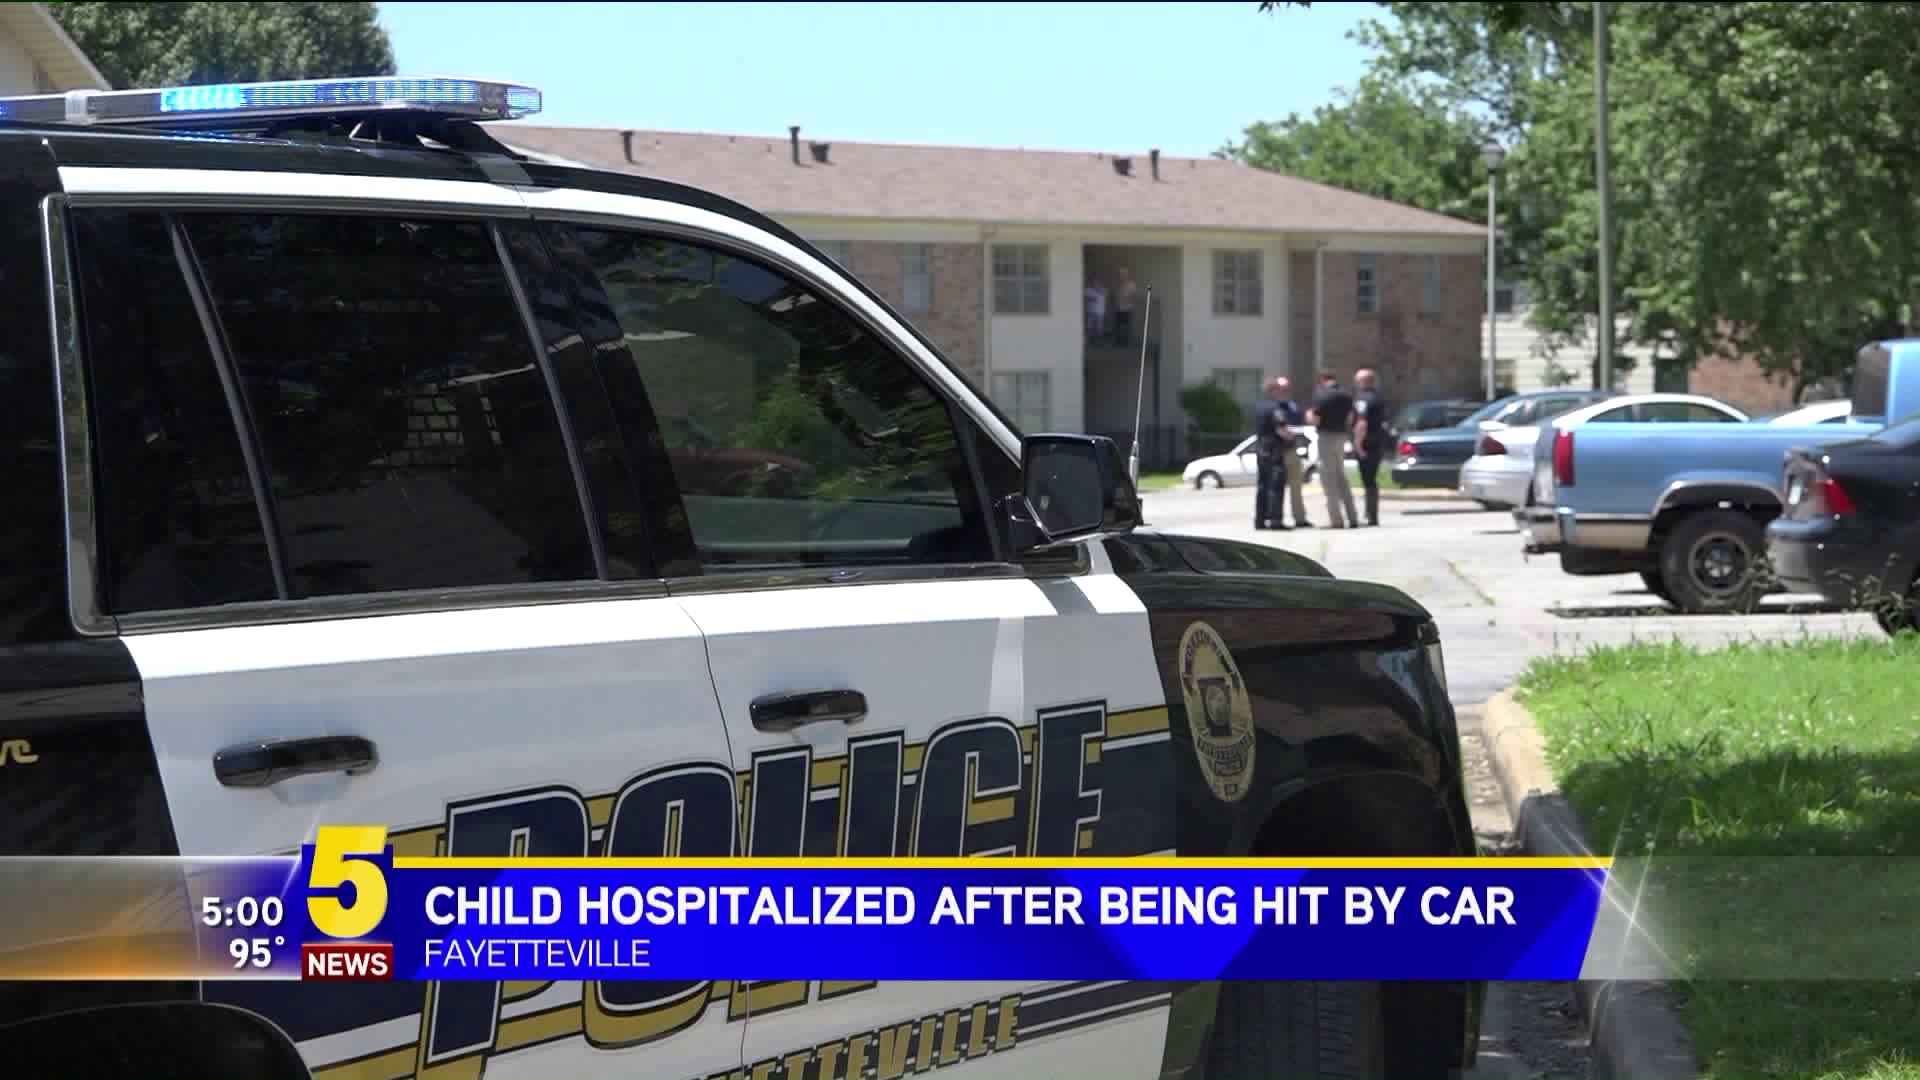 Child Hospitalized After Being Hit By Car